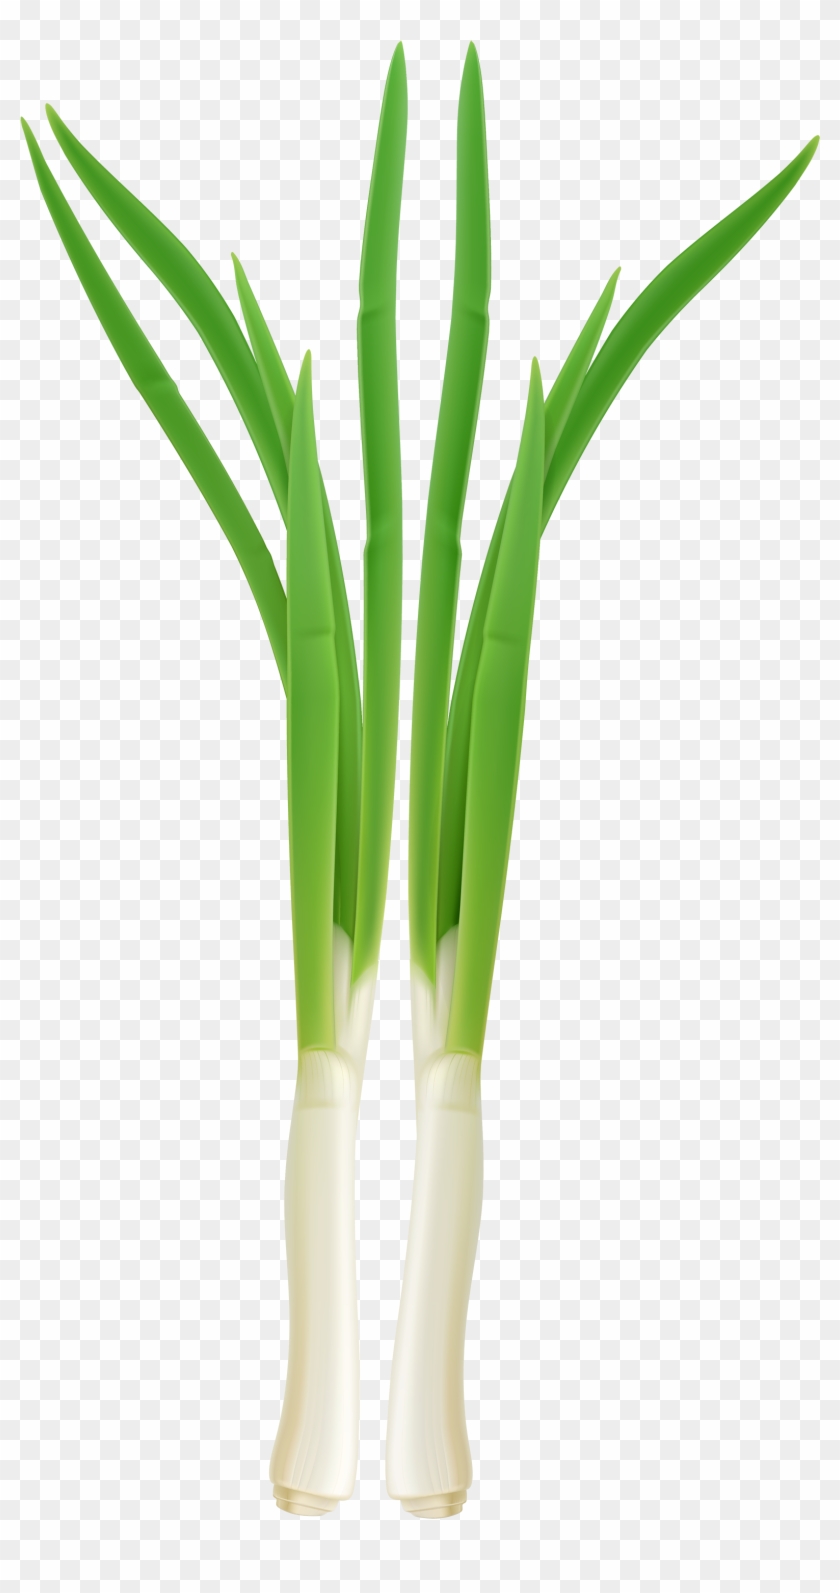 Onion Clipart Onion Plant - Green Onion Clipart Png #302605